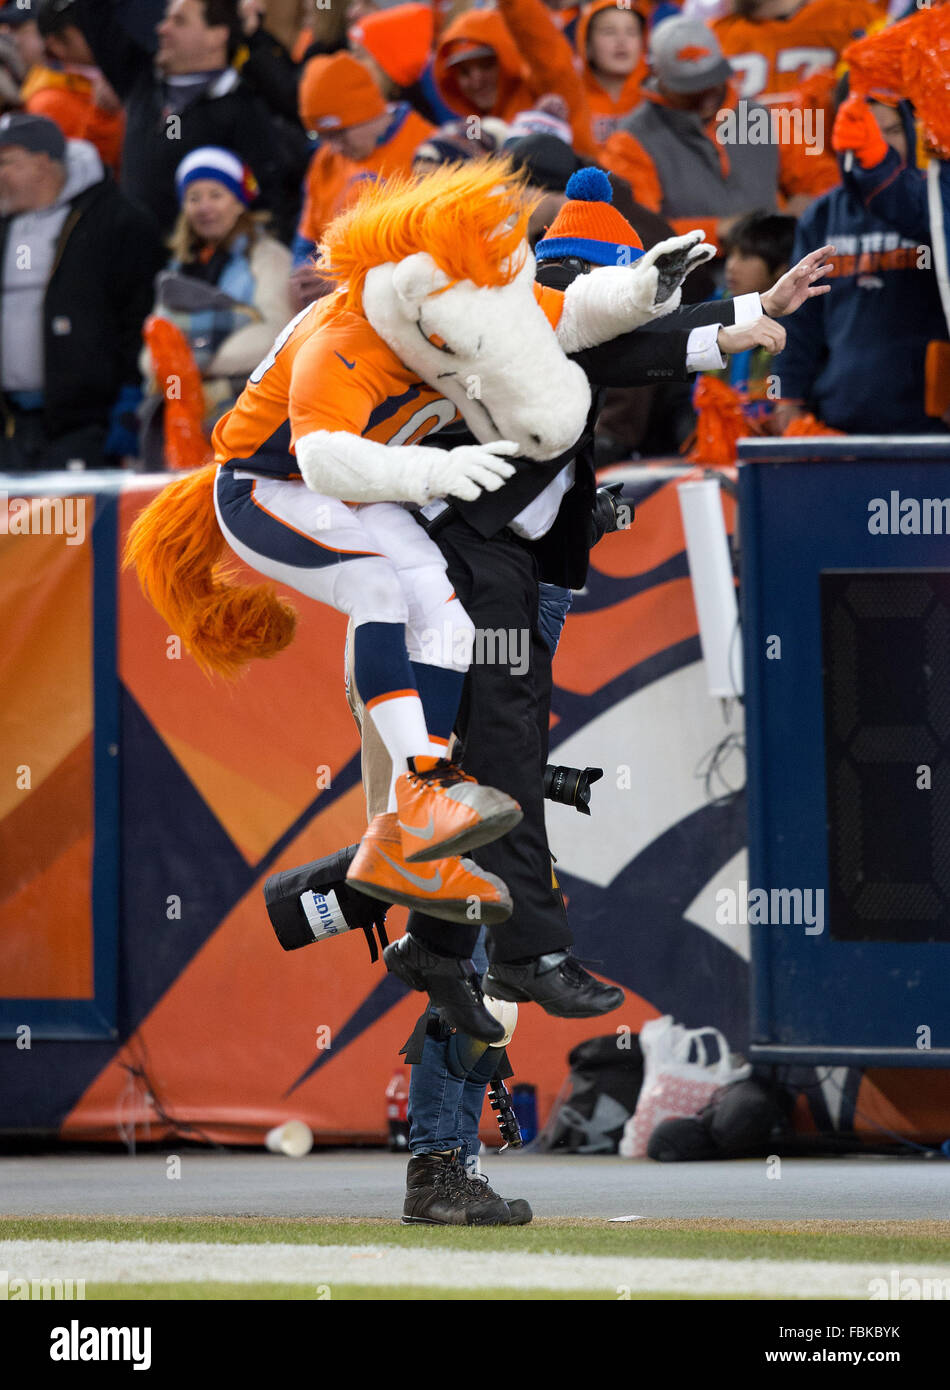 Denver, Colorado, USA. 17th Jan, 2016. Broncos Mascot Miles celebrates with a stadium worker in the end zone at the close of the 4th. Quarter at Sports Authority Field at Mile High Sunday afternoon. The Broncos beat the Steelers 23-16 and advance the the AFC Championship game against the Patriots next week. Credit:  Hector Acevedo/ZUMA Wire/Alamy Live News Stock Photo